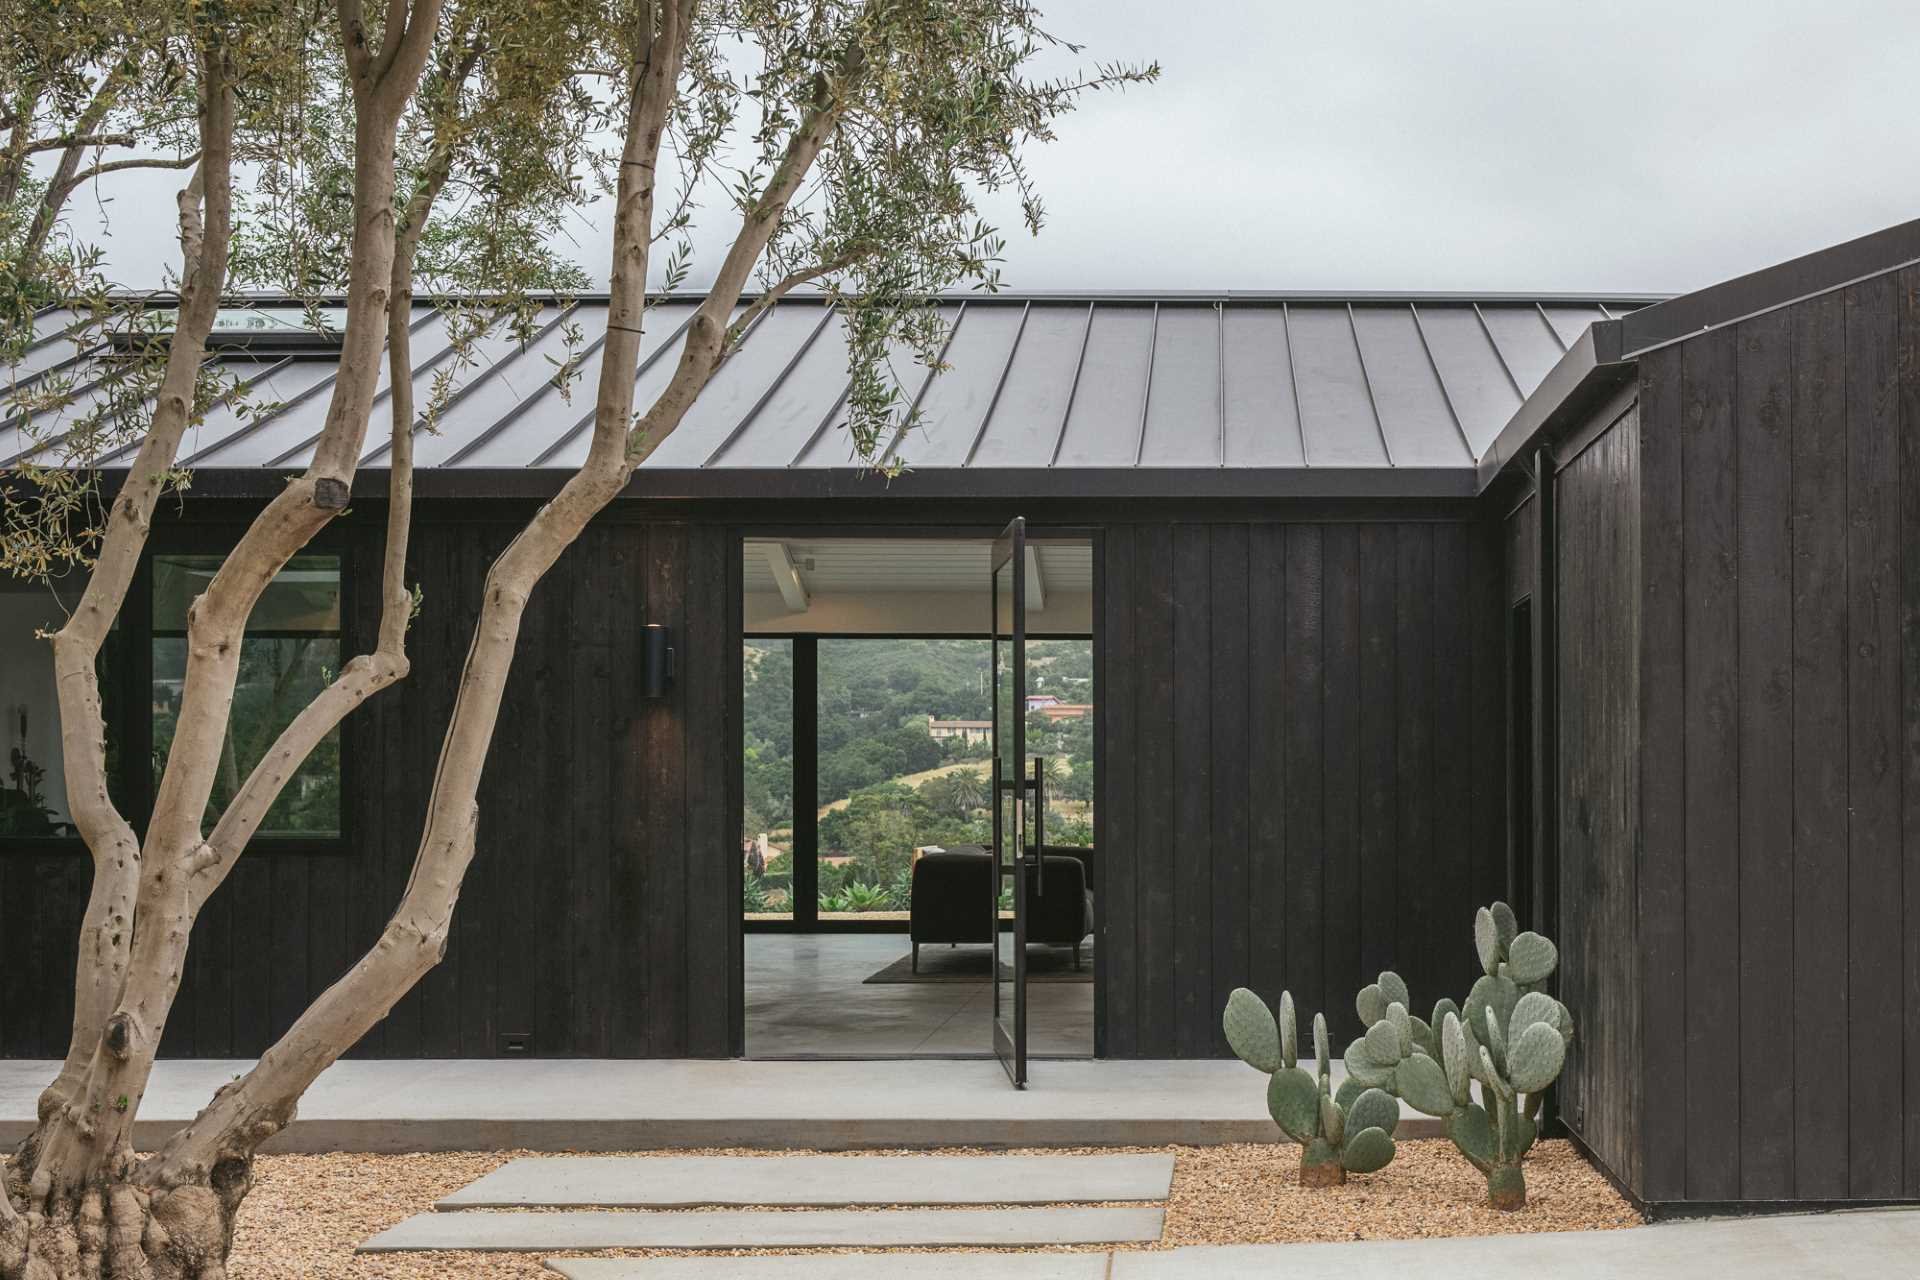 Existing board-and-batten wood siding on this renovated home was replaced with new charred shou sugi ban cedar cladding.